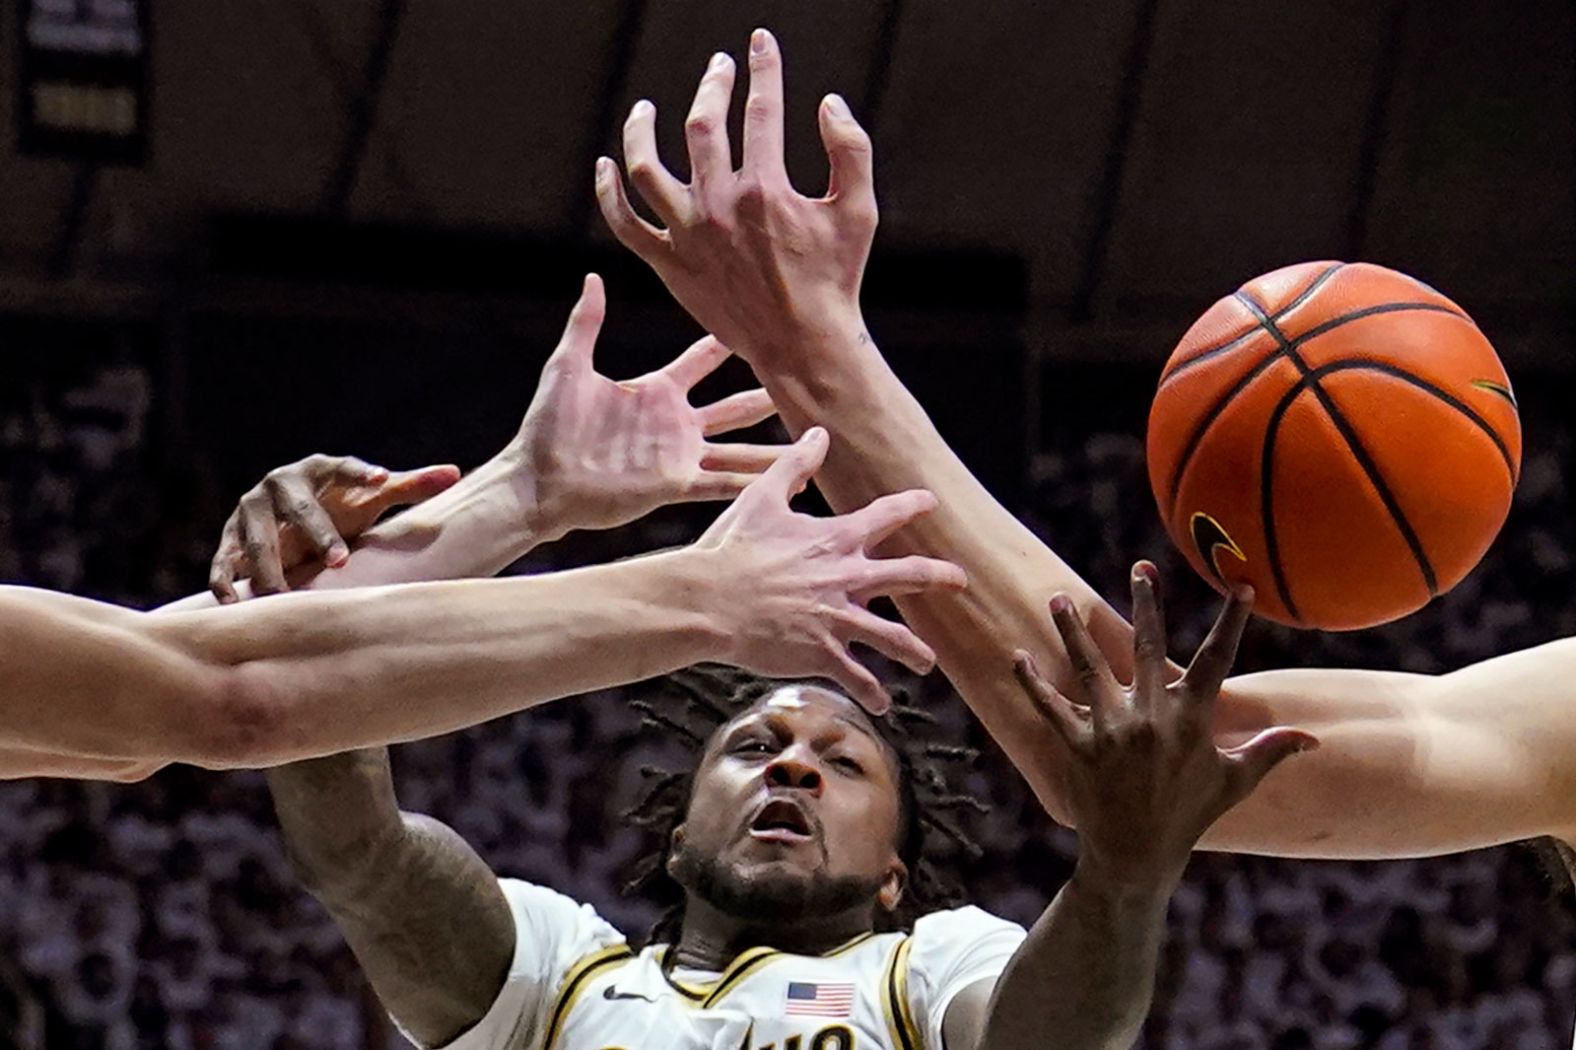 Purdue guard David Jenkins Jr. fights for a rebound with teammate Zach Edey, right, and Michigan State center Carson Cooper, left, during a college basketball game in West Lafayette, Indiana, on Sunday, January 29.